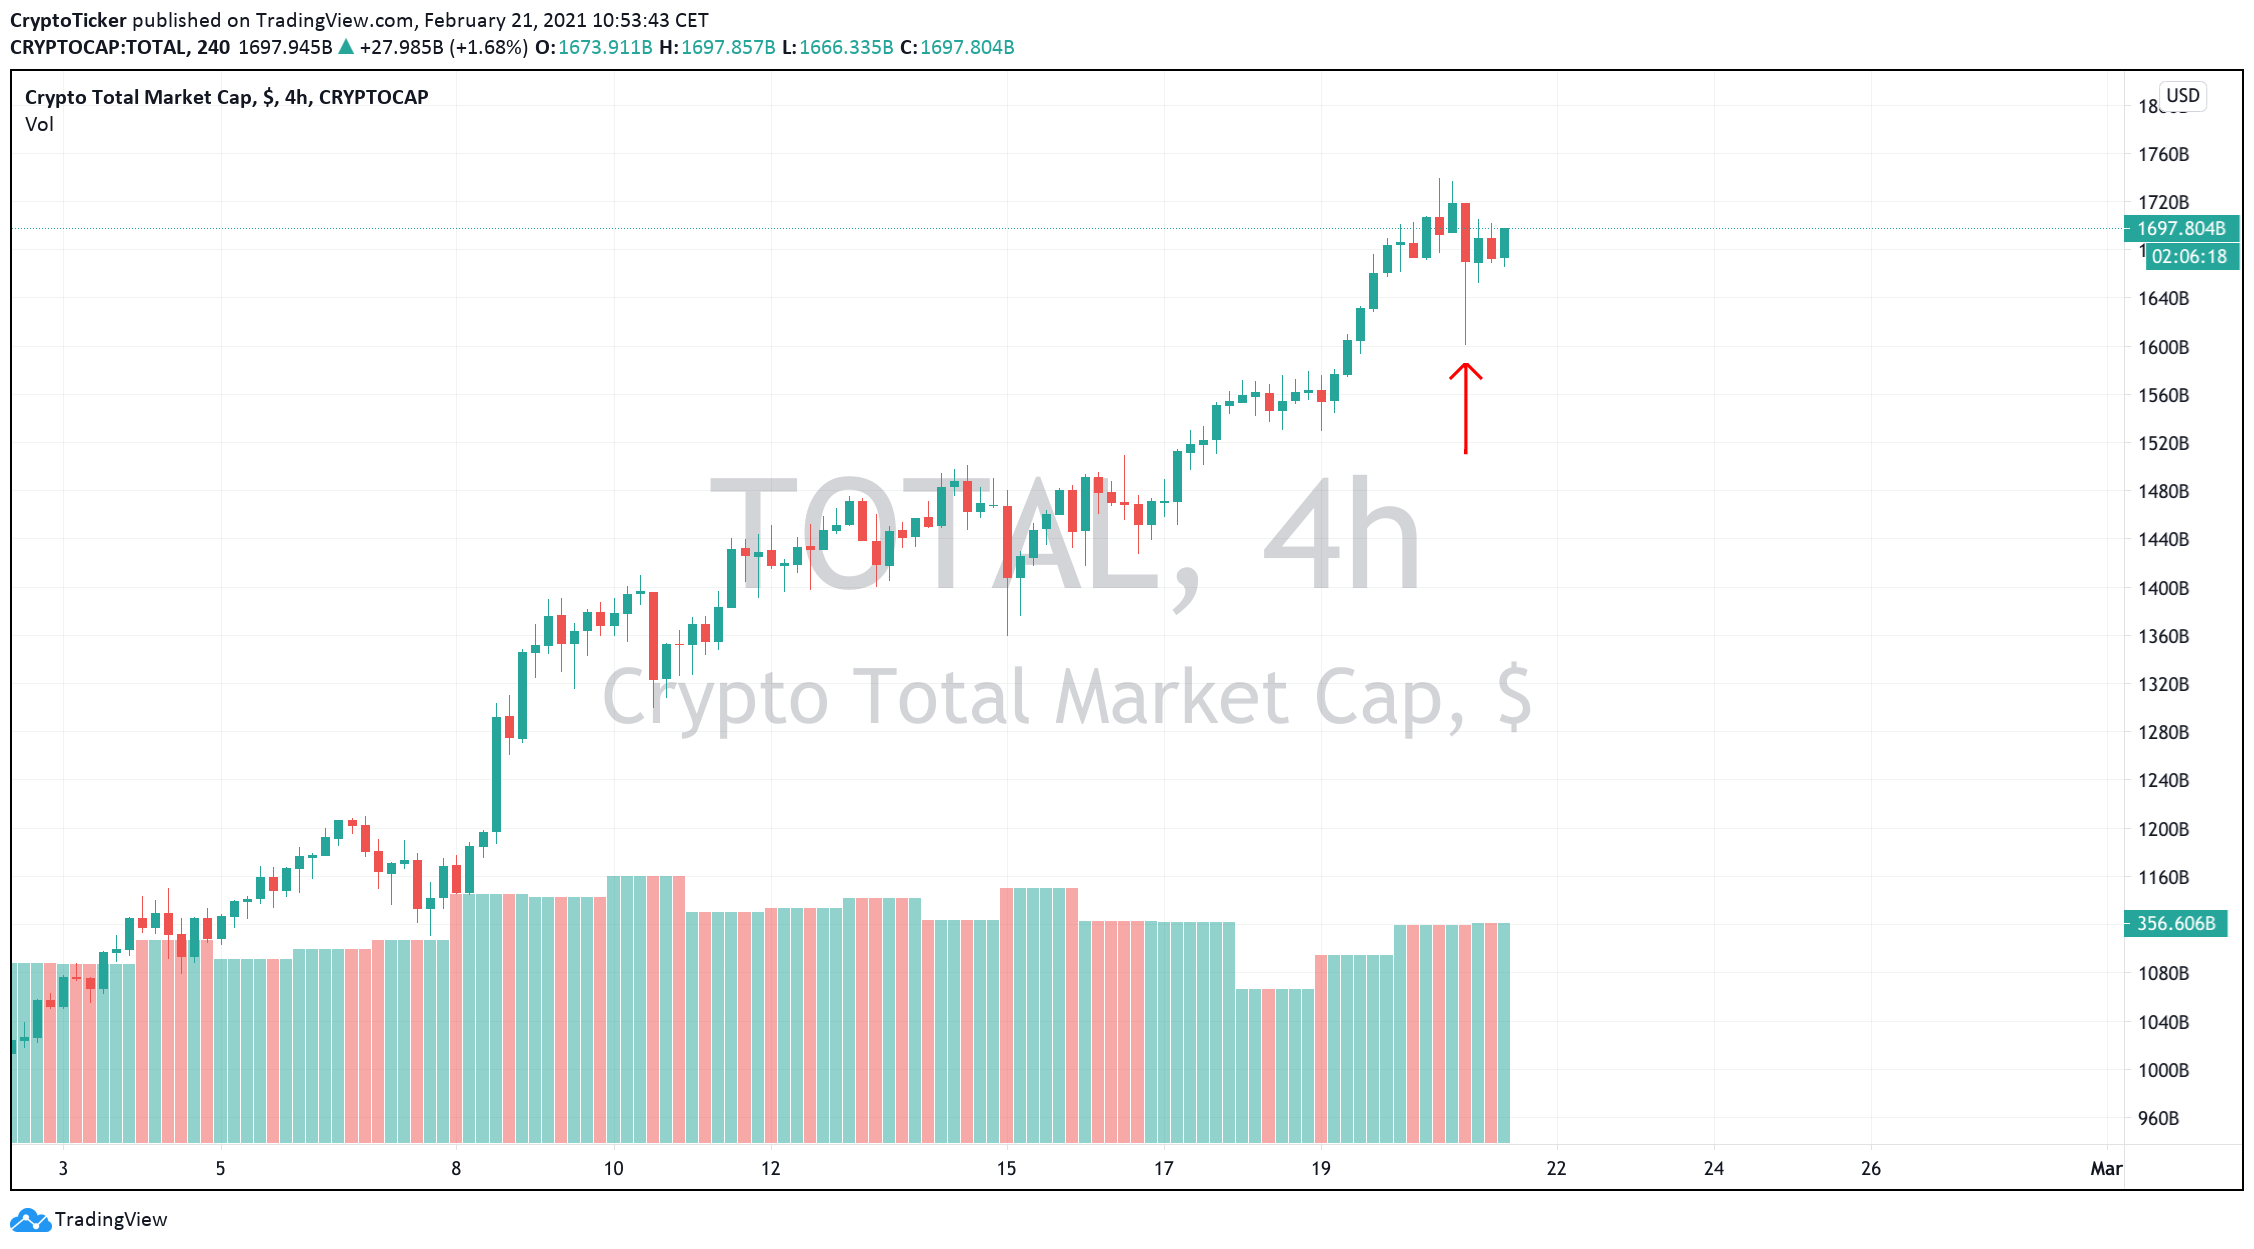 Total market cap 4-hour chart showing a small adjustment in prices